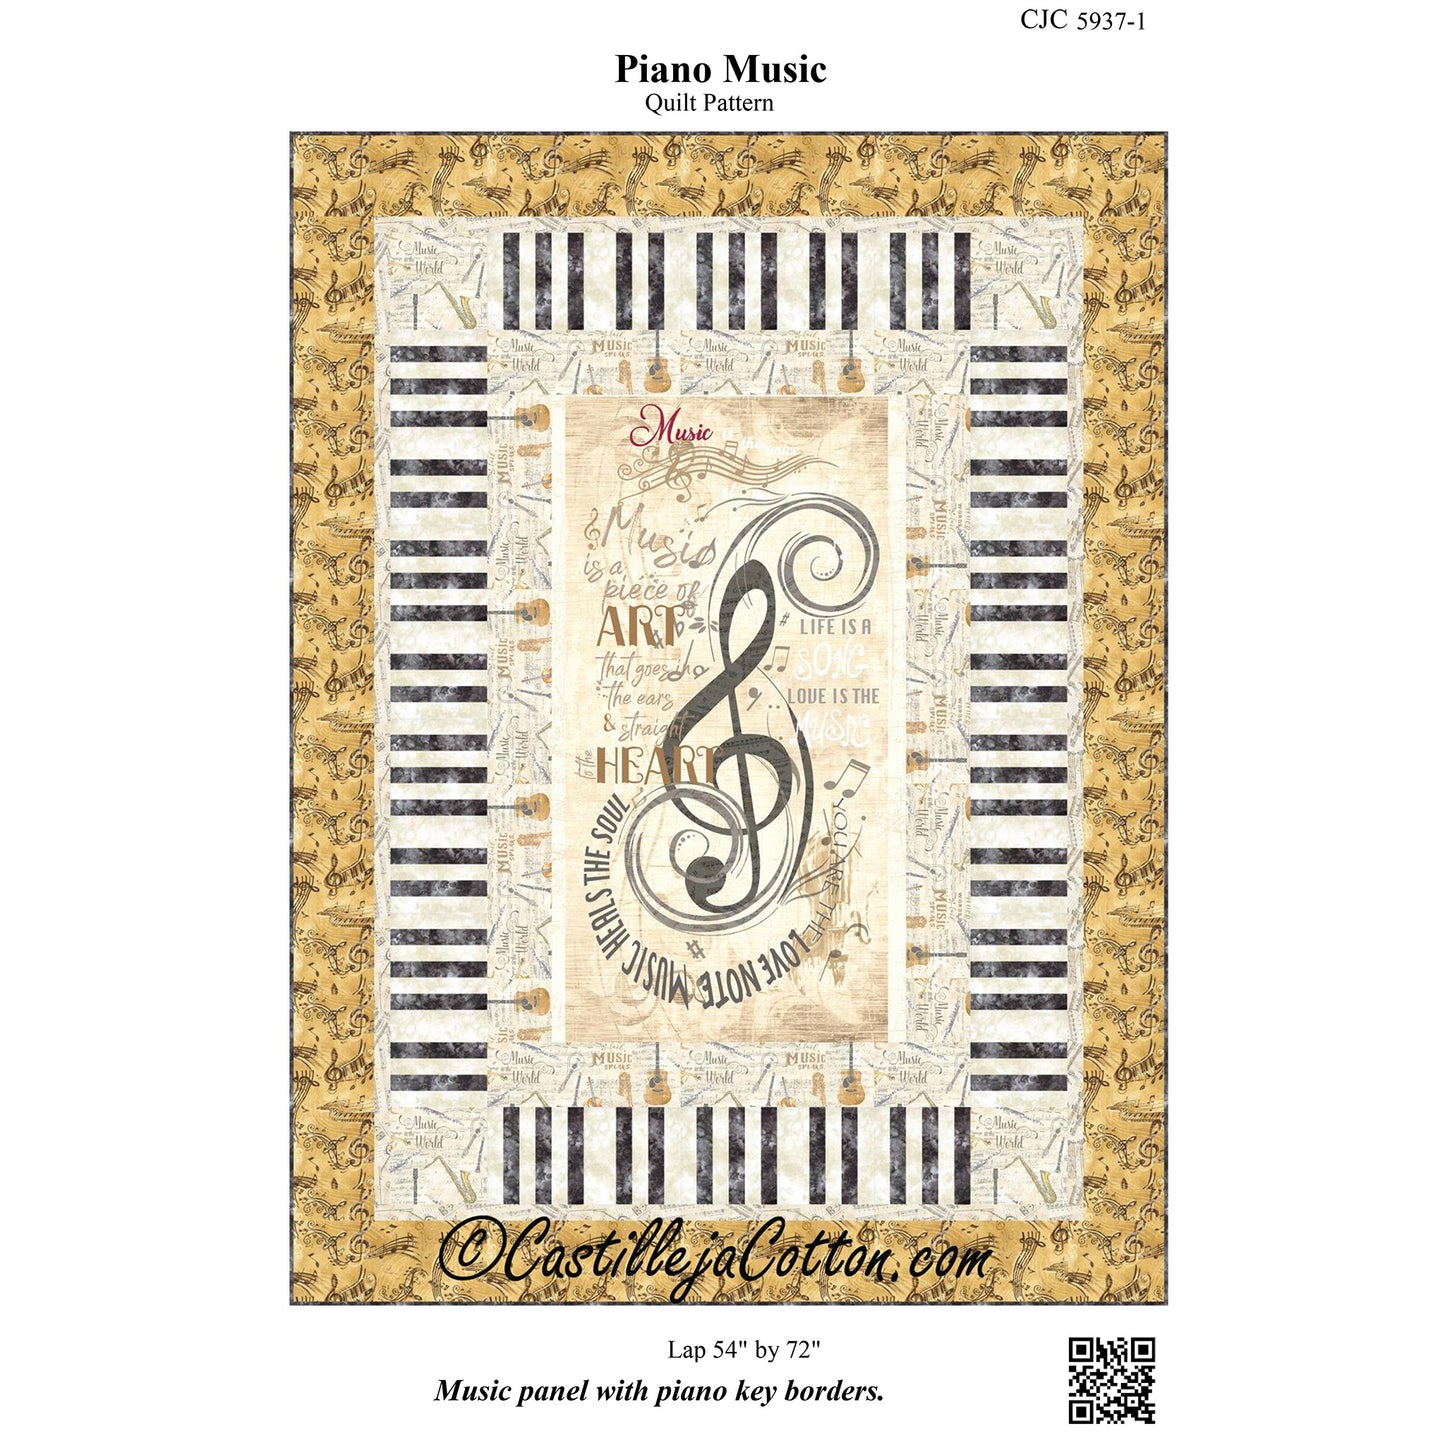 Cover image of pattern for Piano Music Quilt.